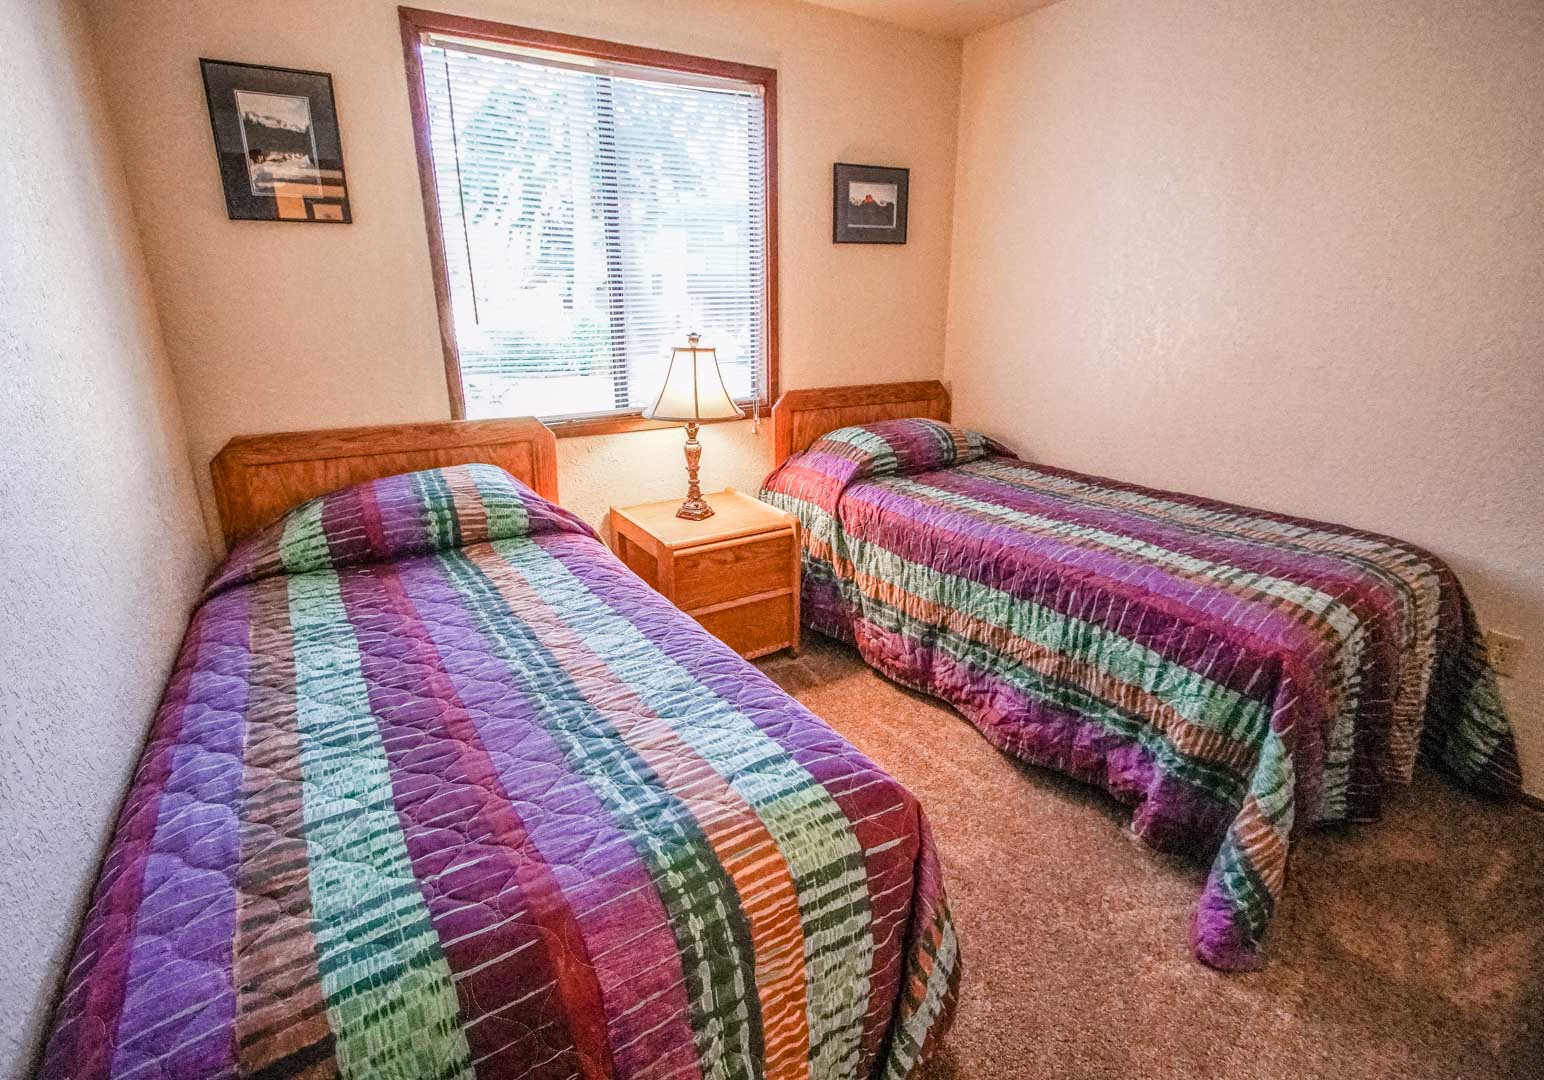 A 2 bedroom unit with double twin beds at VRI's Kala Point Village in Port Townsend, Washington.